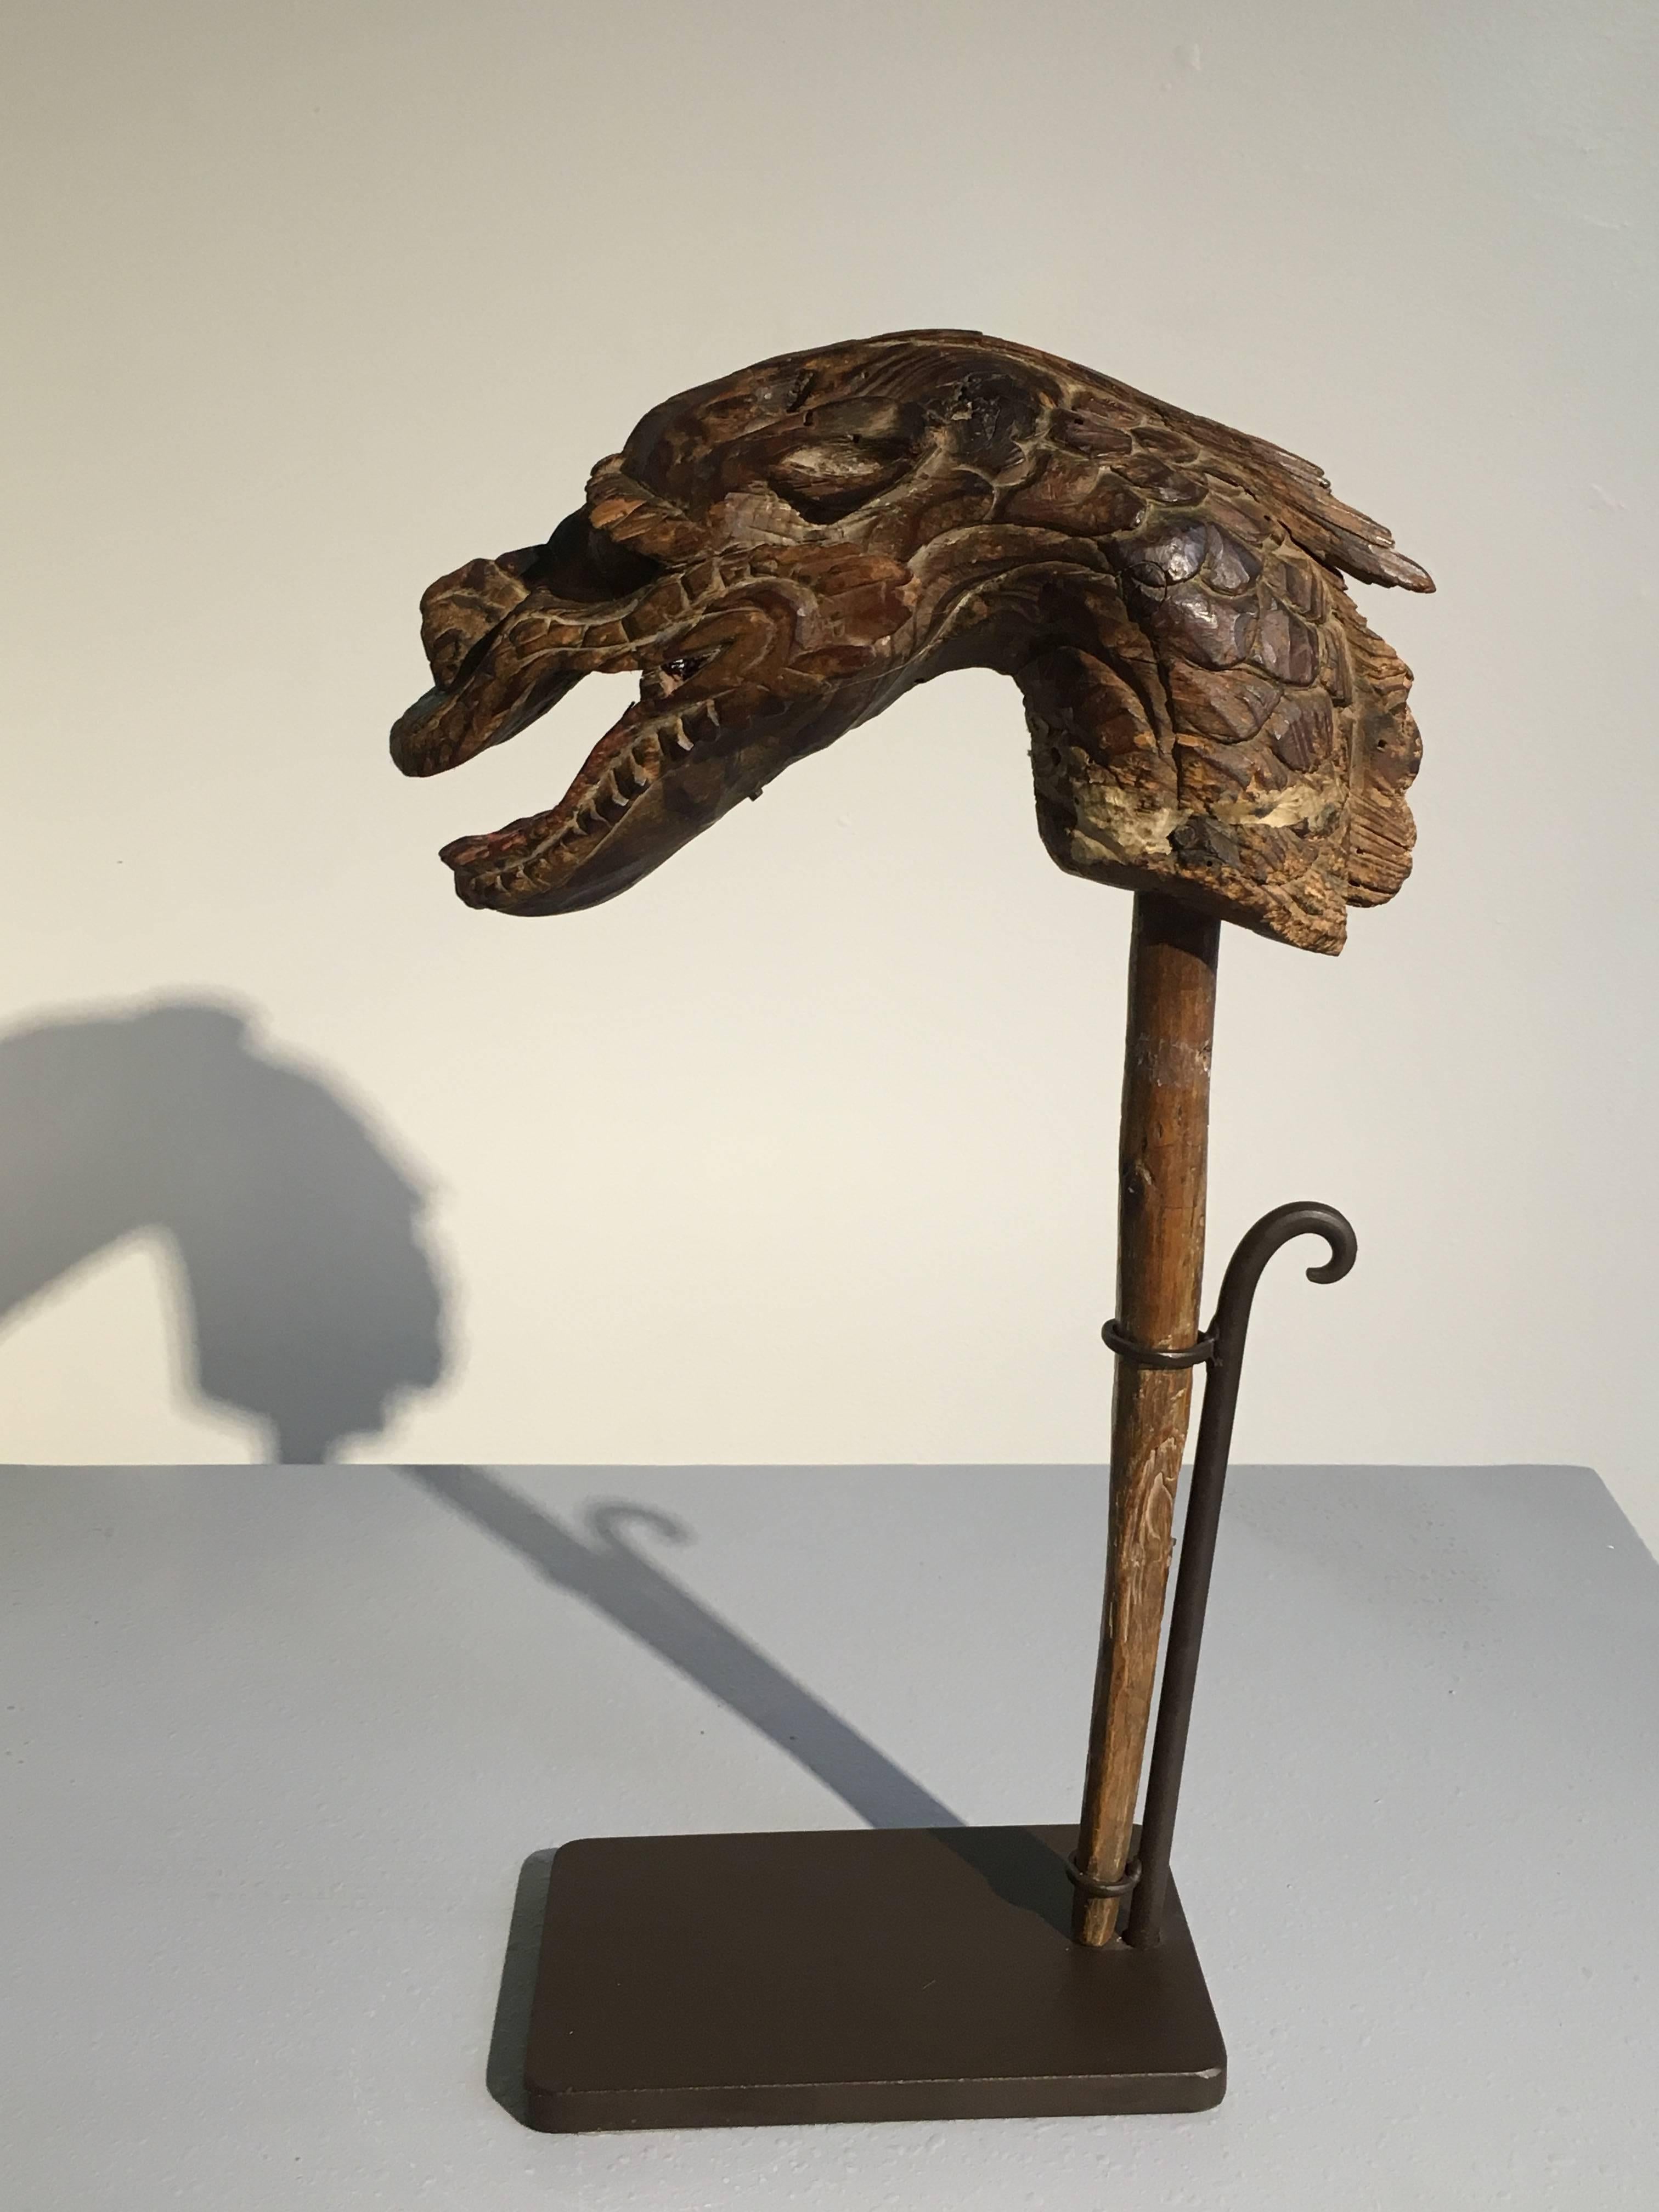 A fabulous Japanese mingei (Folk Art) carved pupped head in the form of a dragon. Edo period (1603-1868), early 19th century or earlier.
Carved from keyaki (elm) wood, as if moving and undulating. The sinuous dragon has large, bulling eyes which